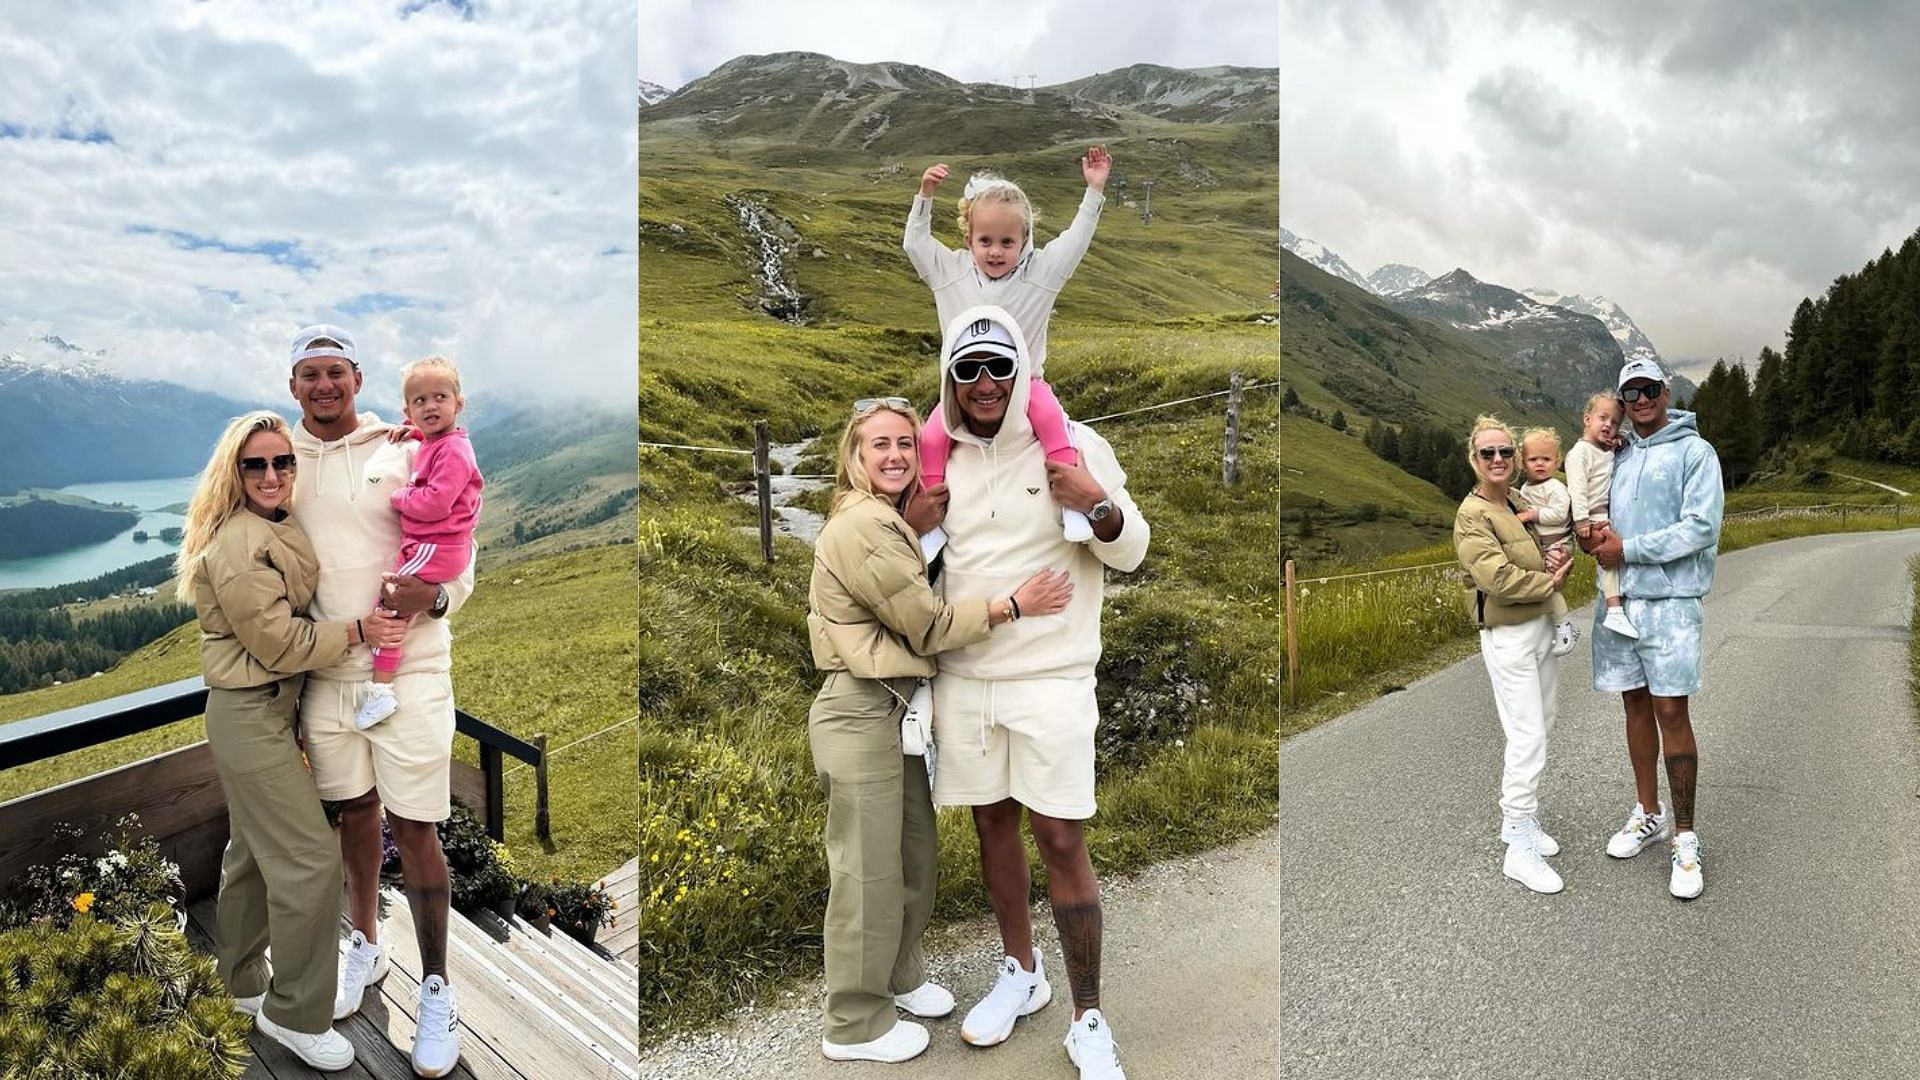 Patrick Mahomes with his wife Brittany and children in Switzerland (Credit: @brittanylynne IG)